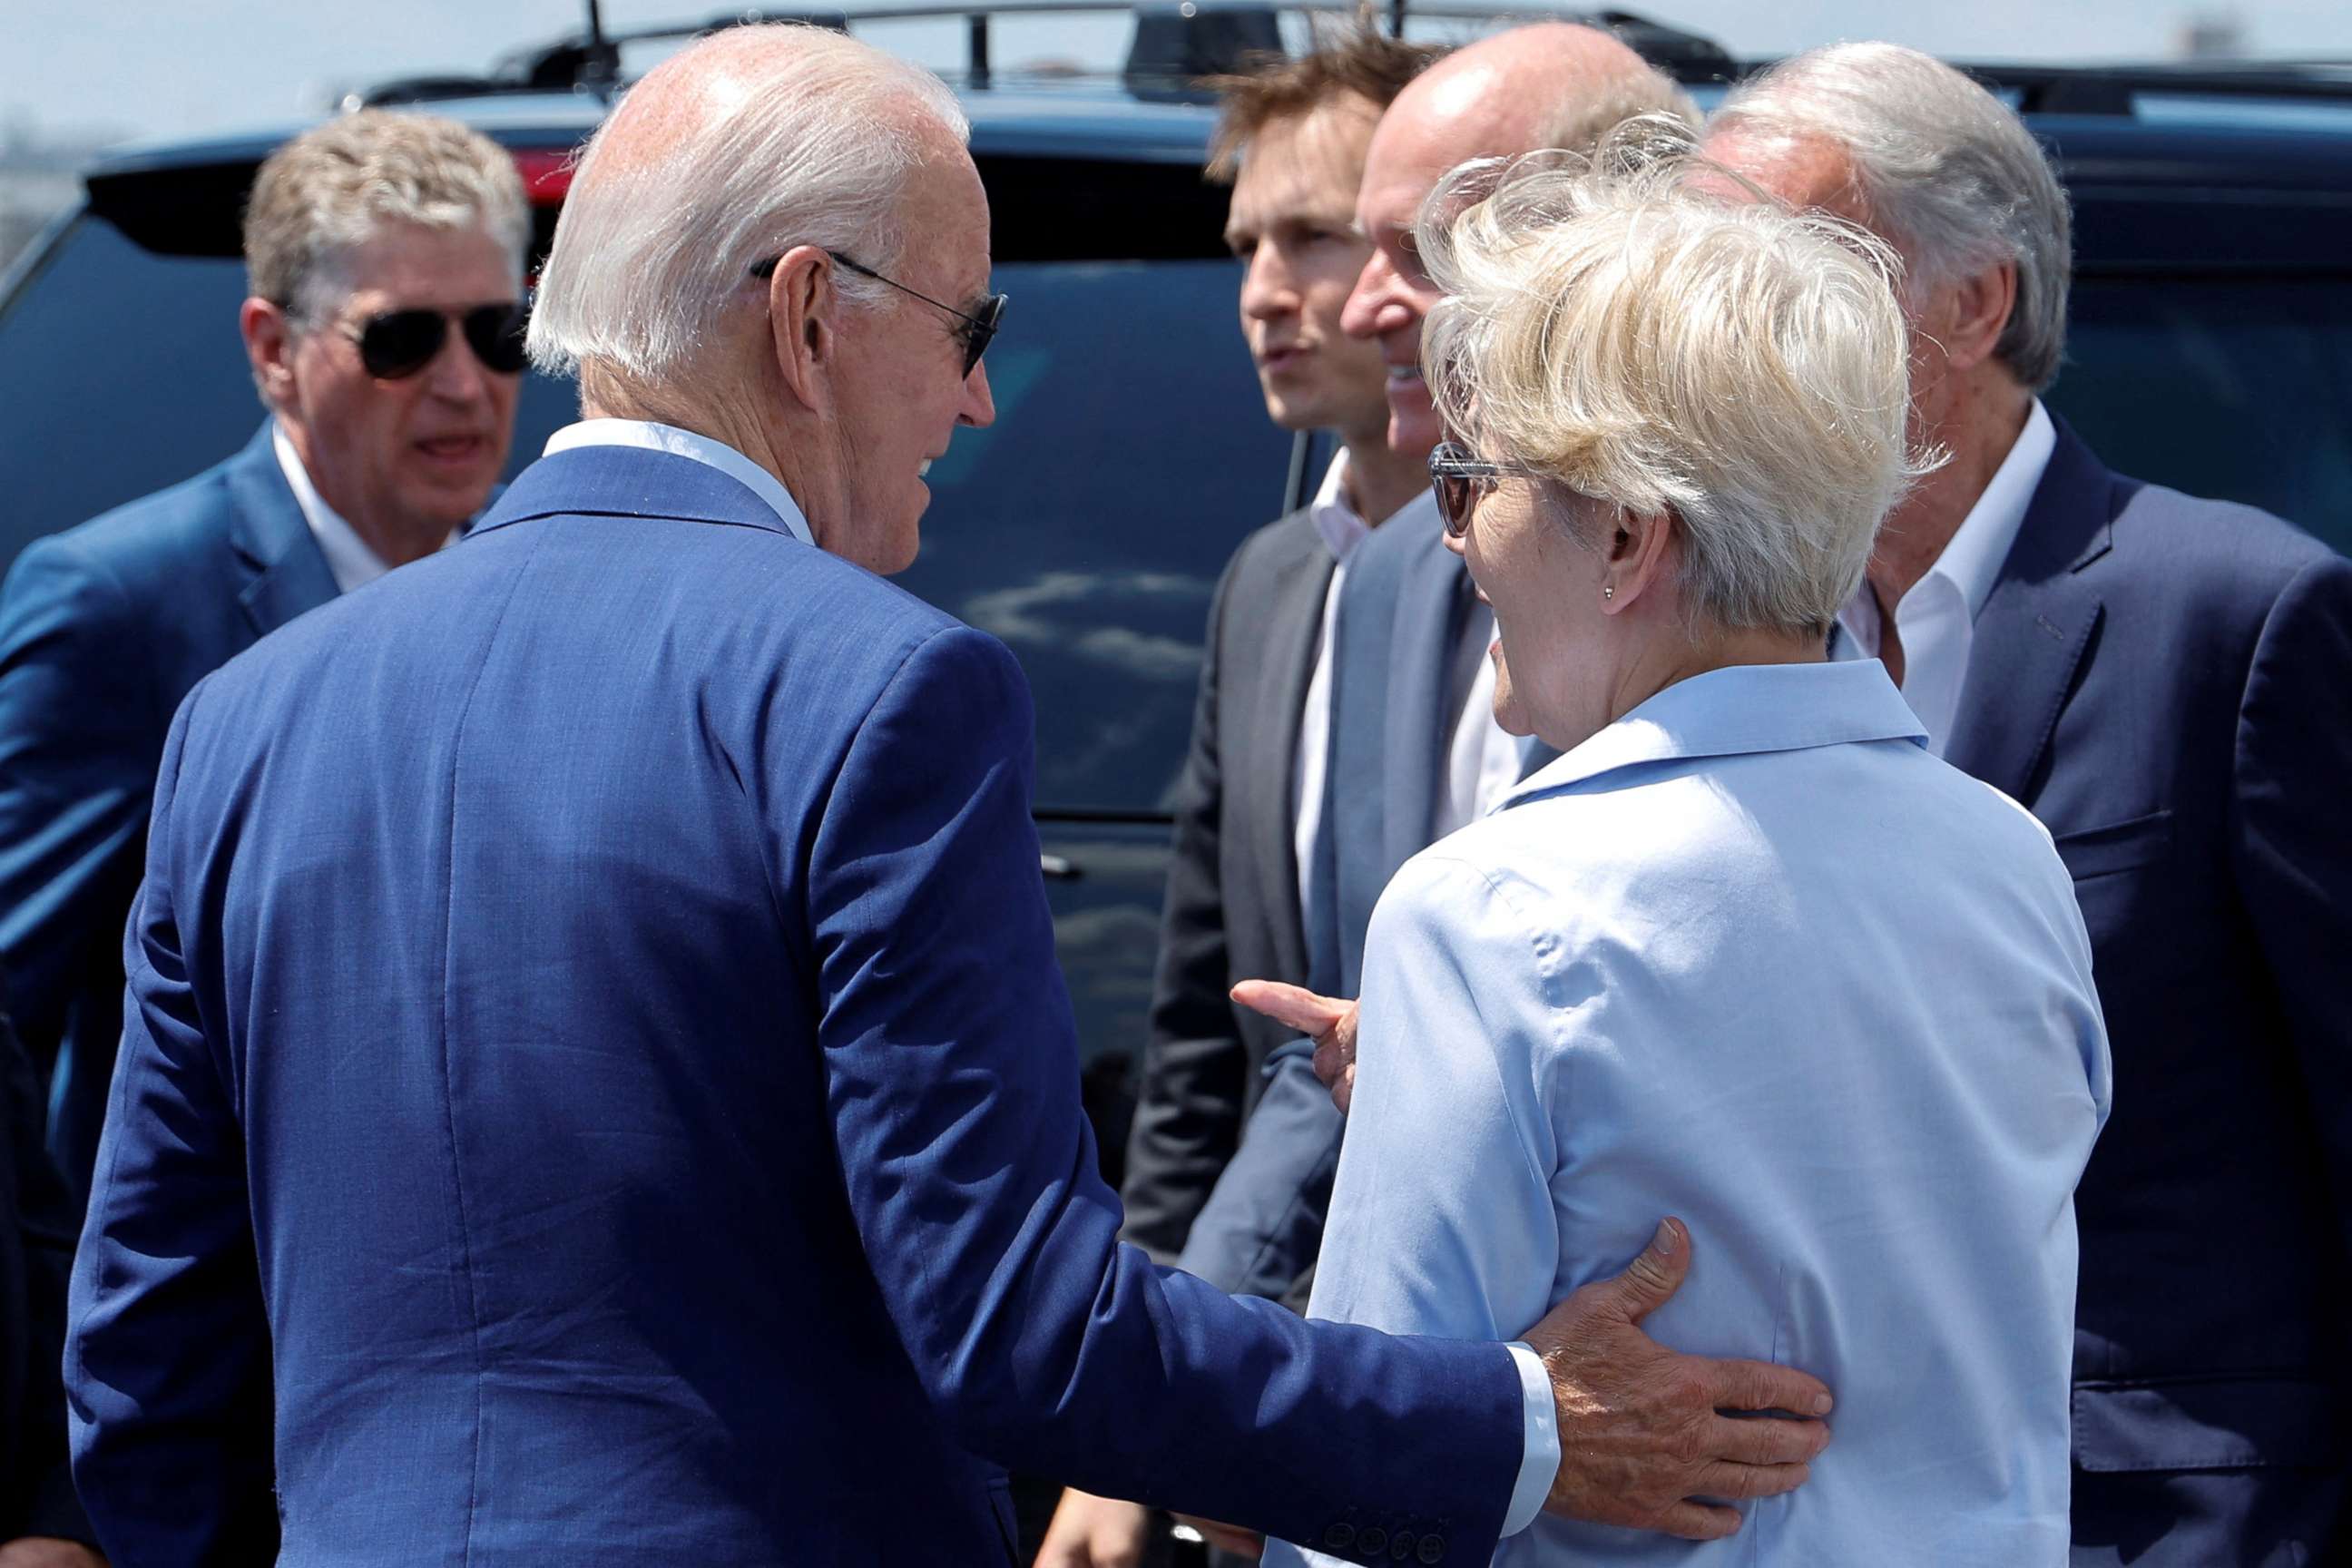 PHOTO: President Joe Biden interacts with Senator Elizabeth Warren and other elected officials after arriving at T.F. Green International Airport in Warwick, R.I., July 20, 2022. 